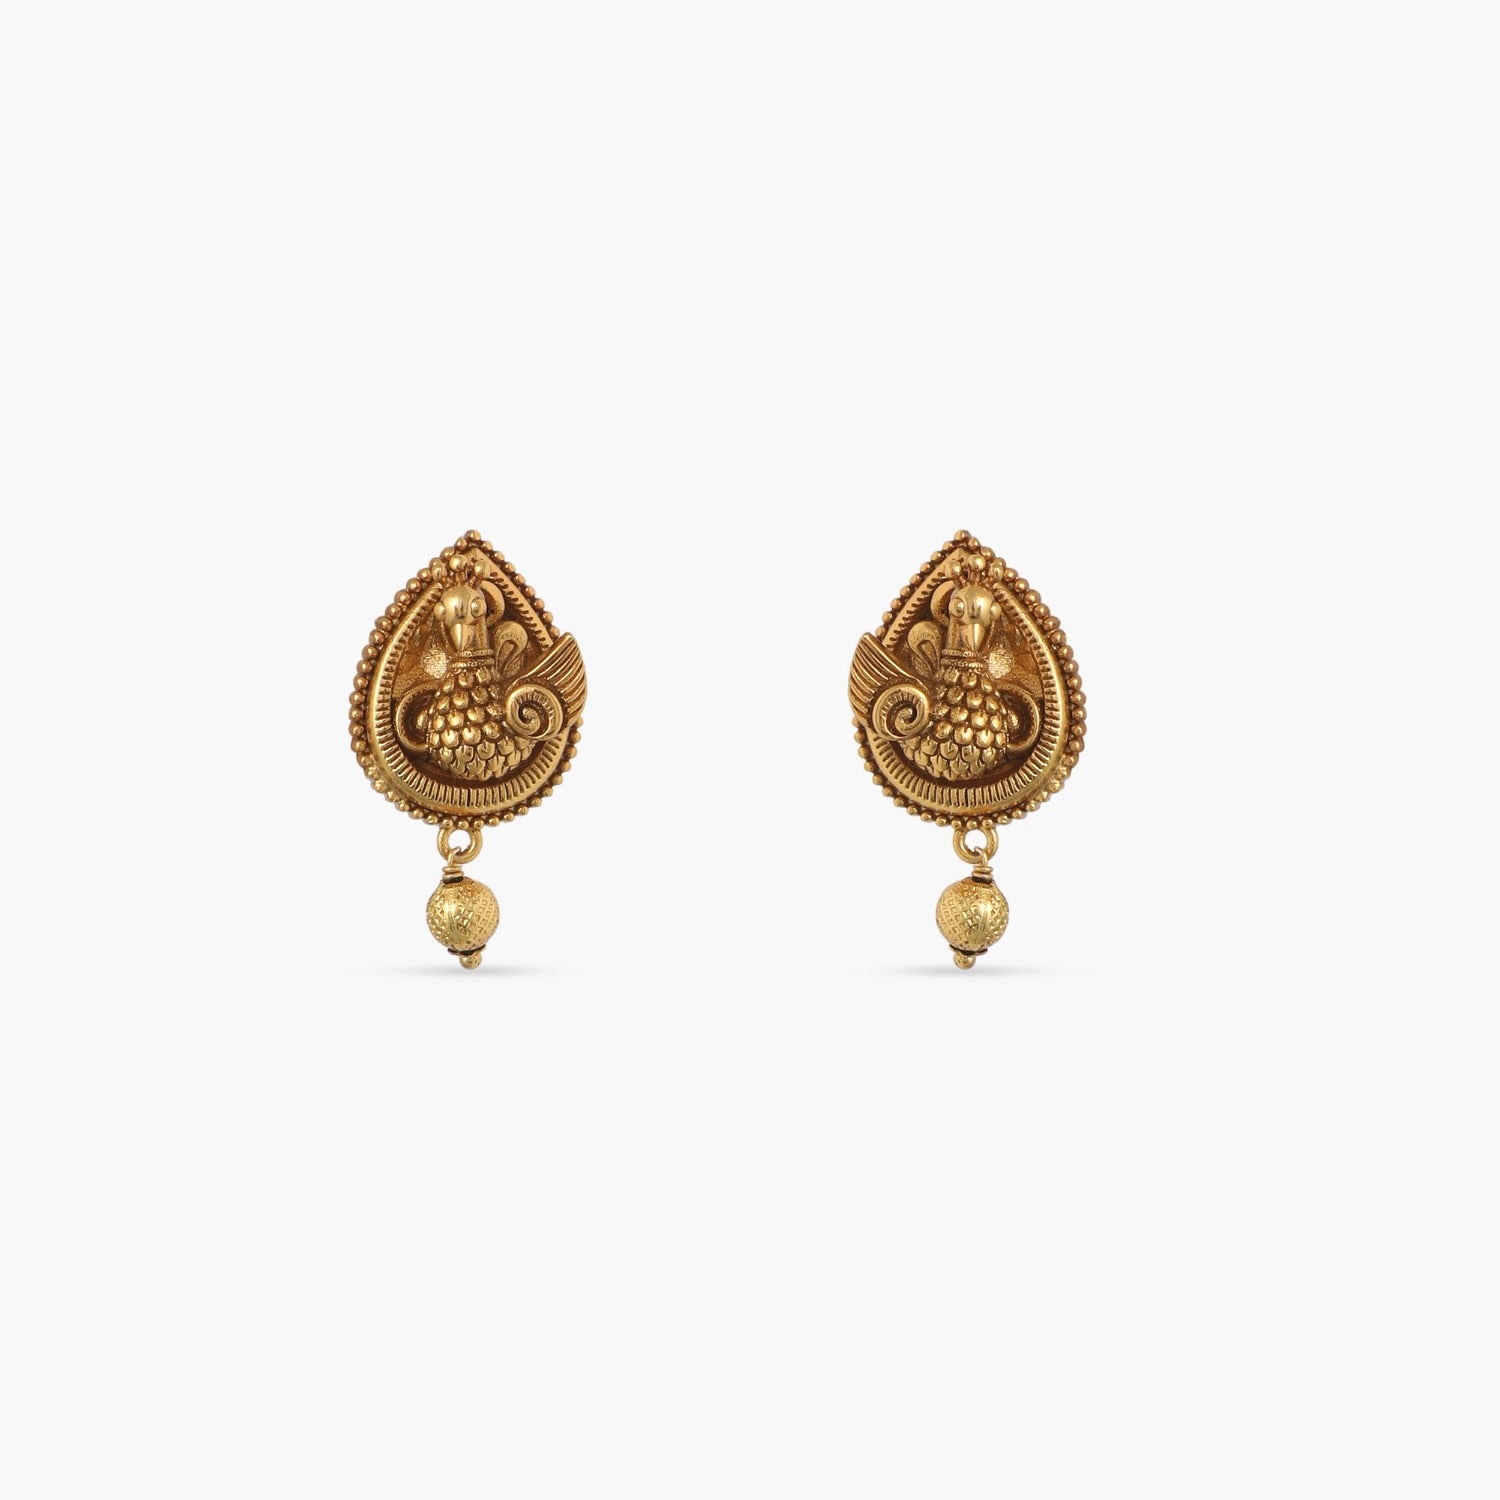 Antique Gold Chandbali Earrings with Hanging Pearls